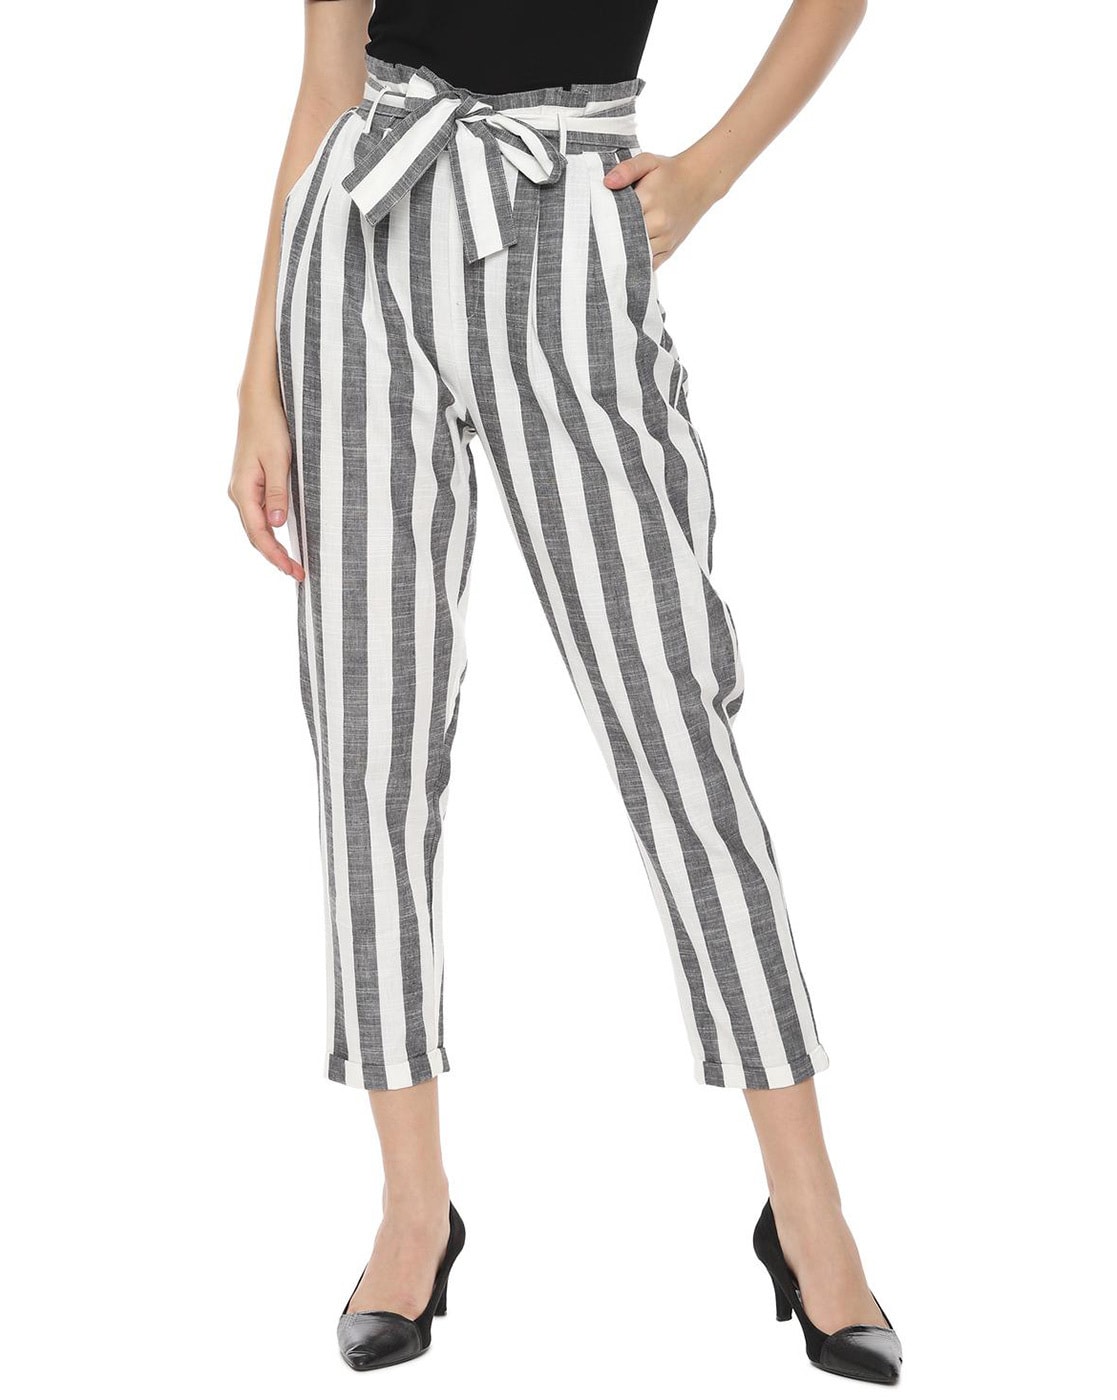 Striped trousers | Order pinstriped trousers from NA-KD | NA-KD